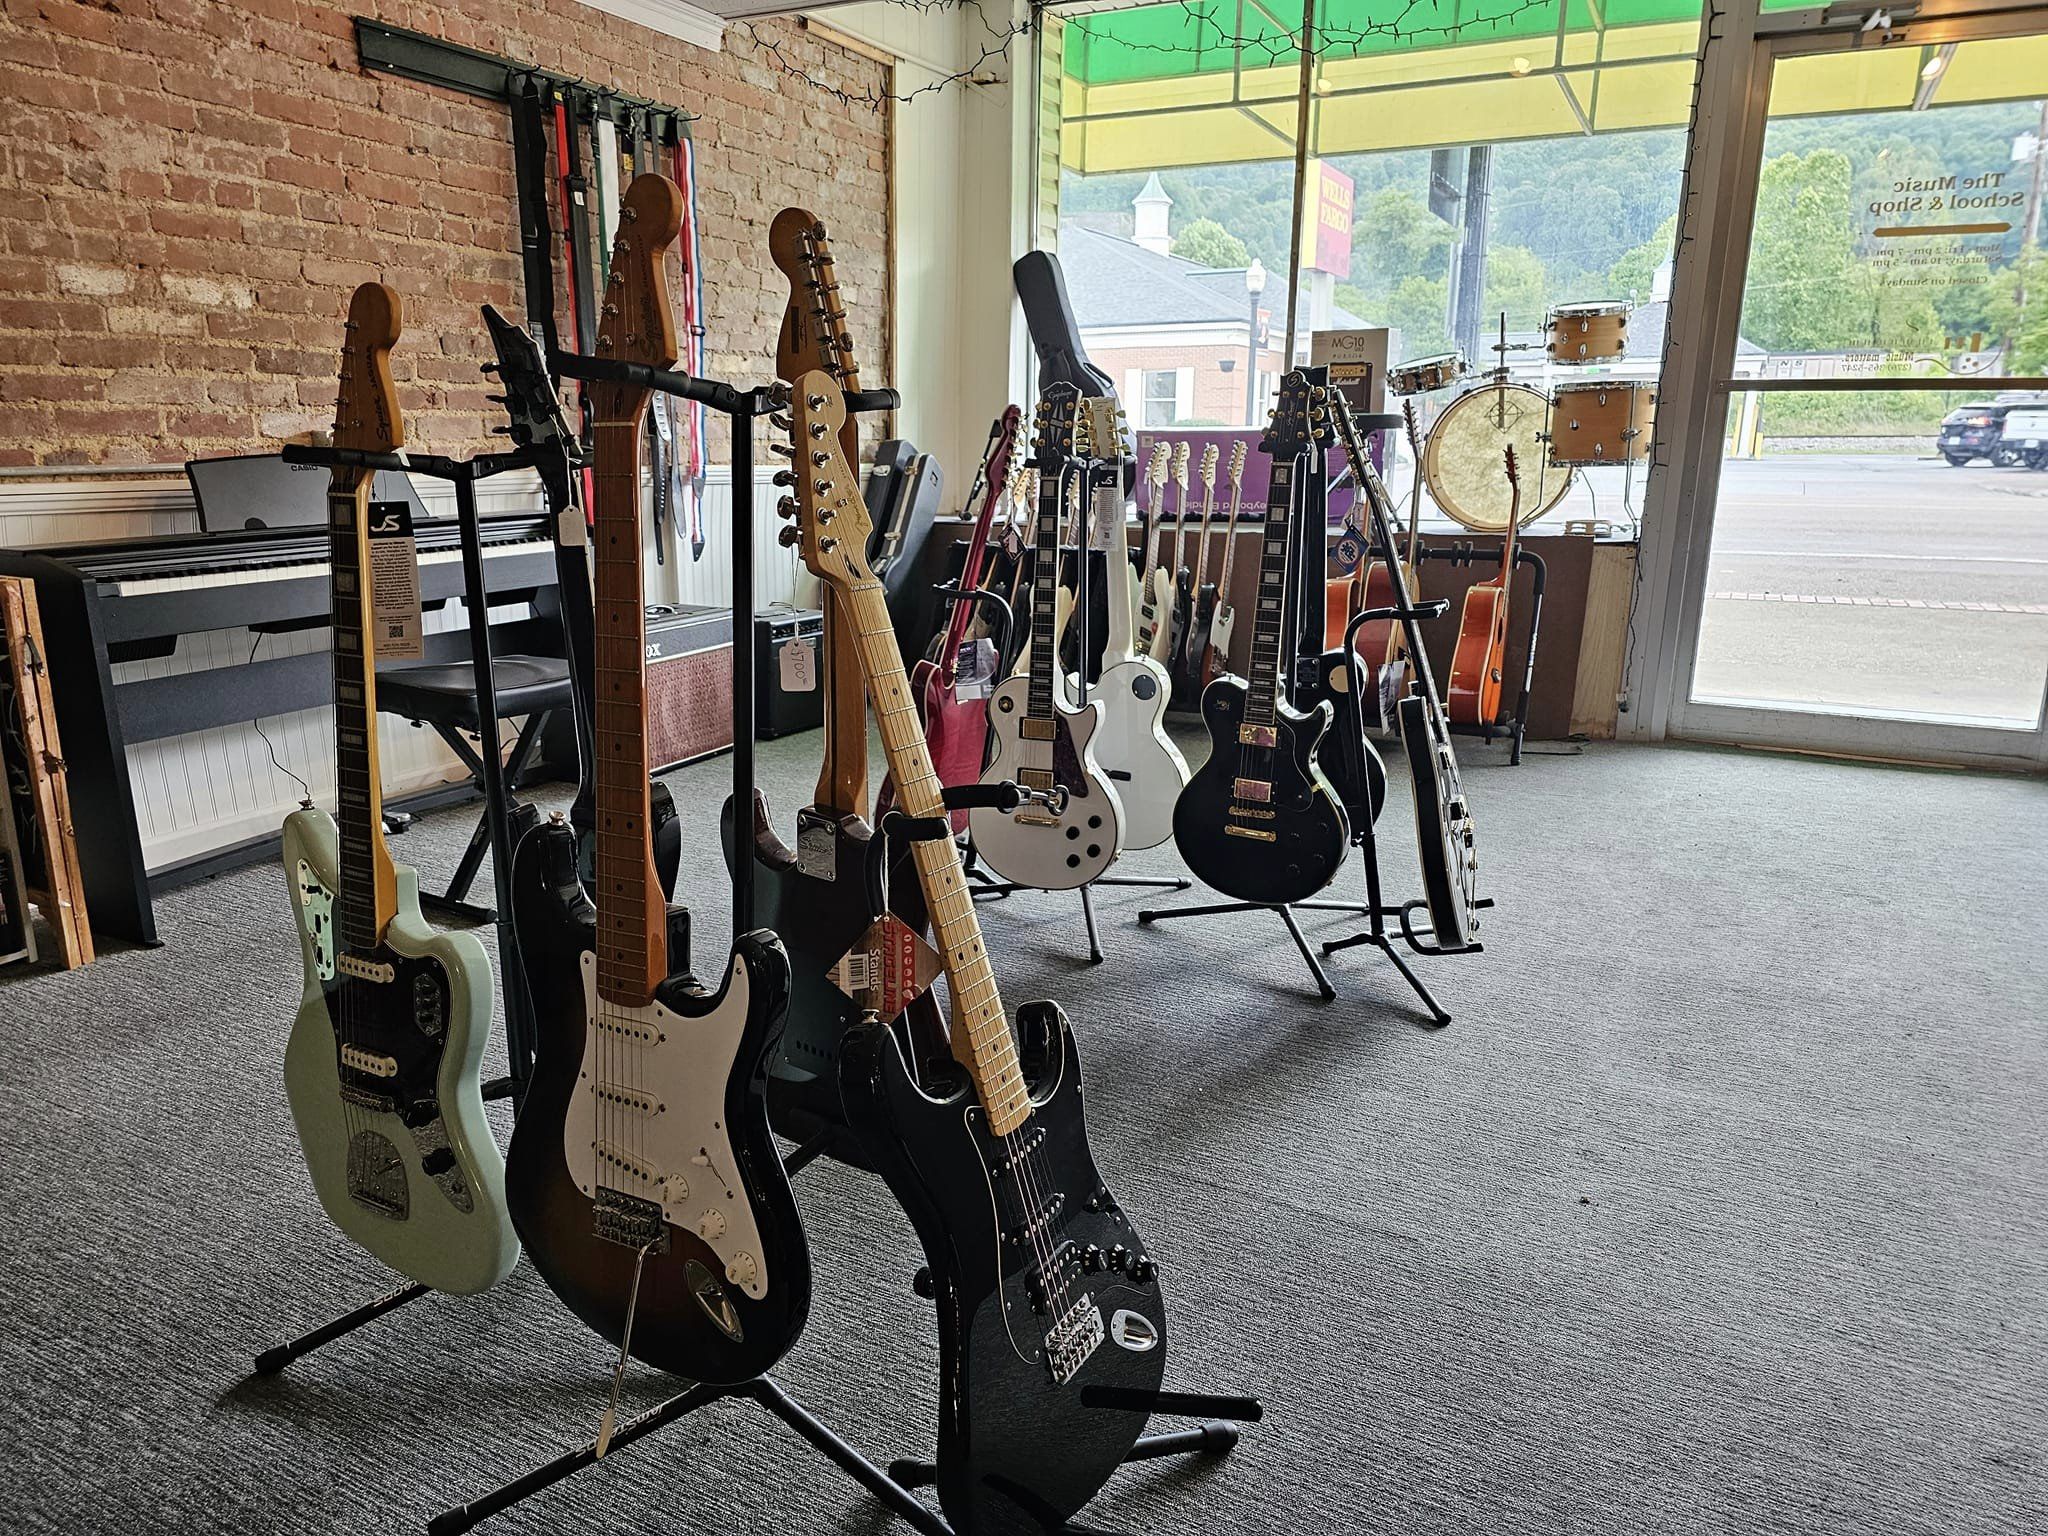 Guitars on display at the Music School and Shop